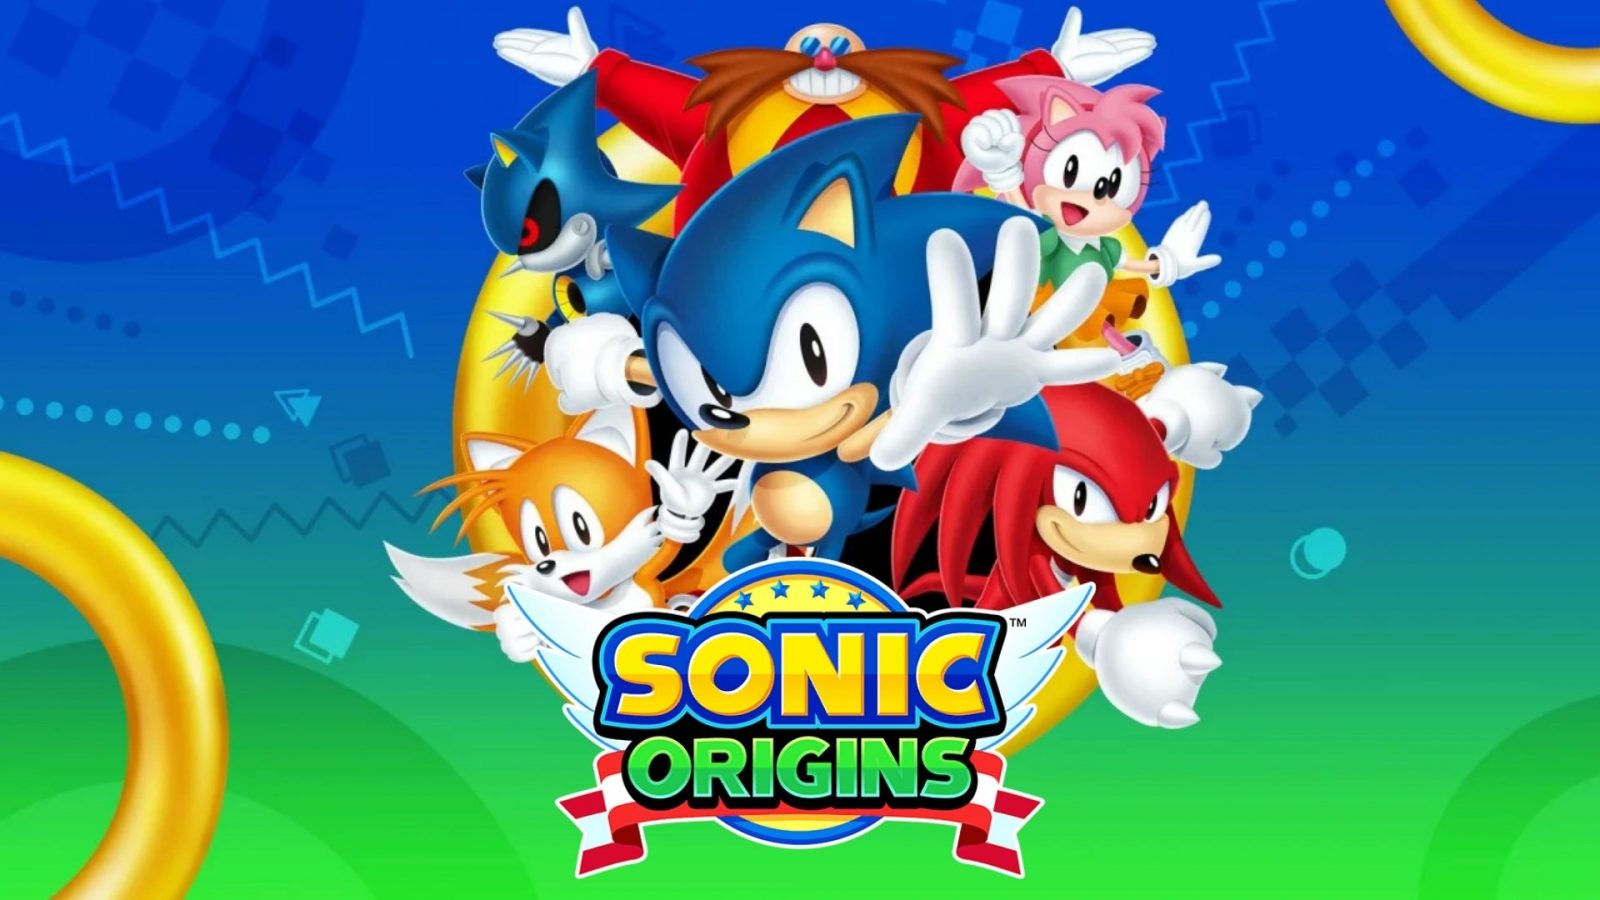 Linkabel on Twitter I made animated wallpapers of the 3D Islands from Sonic  Origins using Wallpaper Engine You can get them through the Steam Workshop  here httpstco8IDFPK6zAF httpstcoAS0LdI8VFQ  Twitter